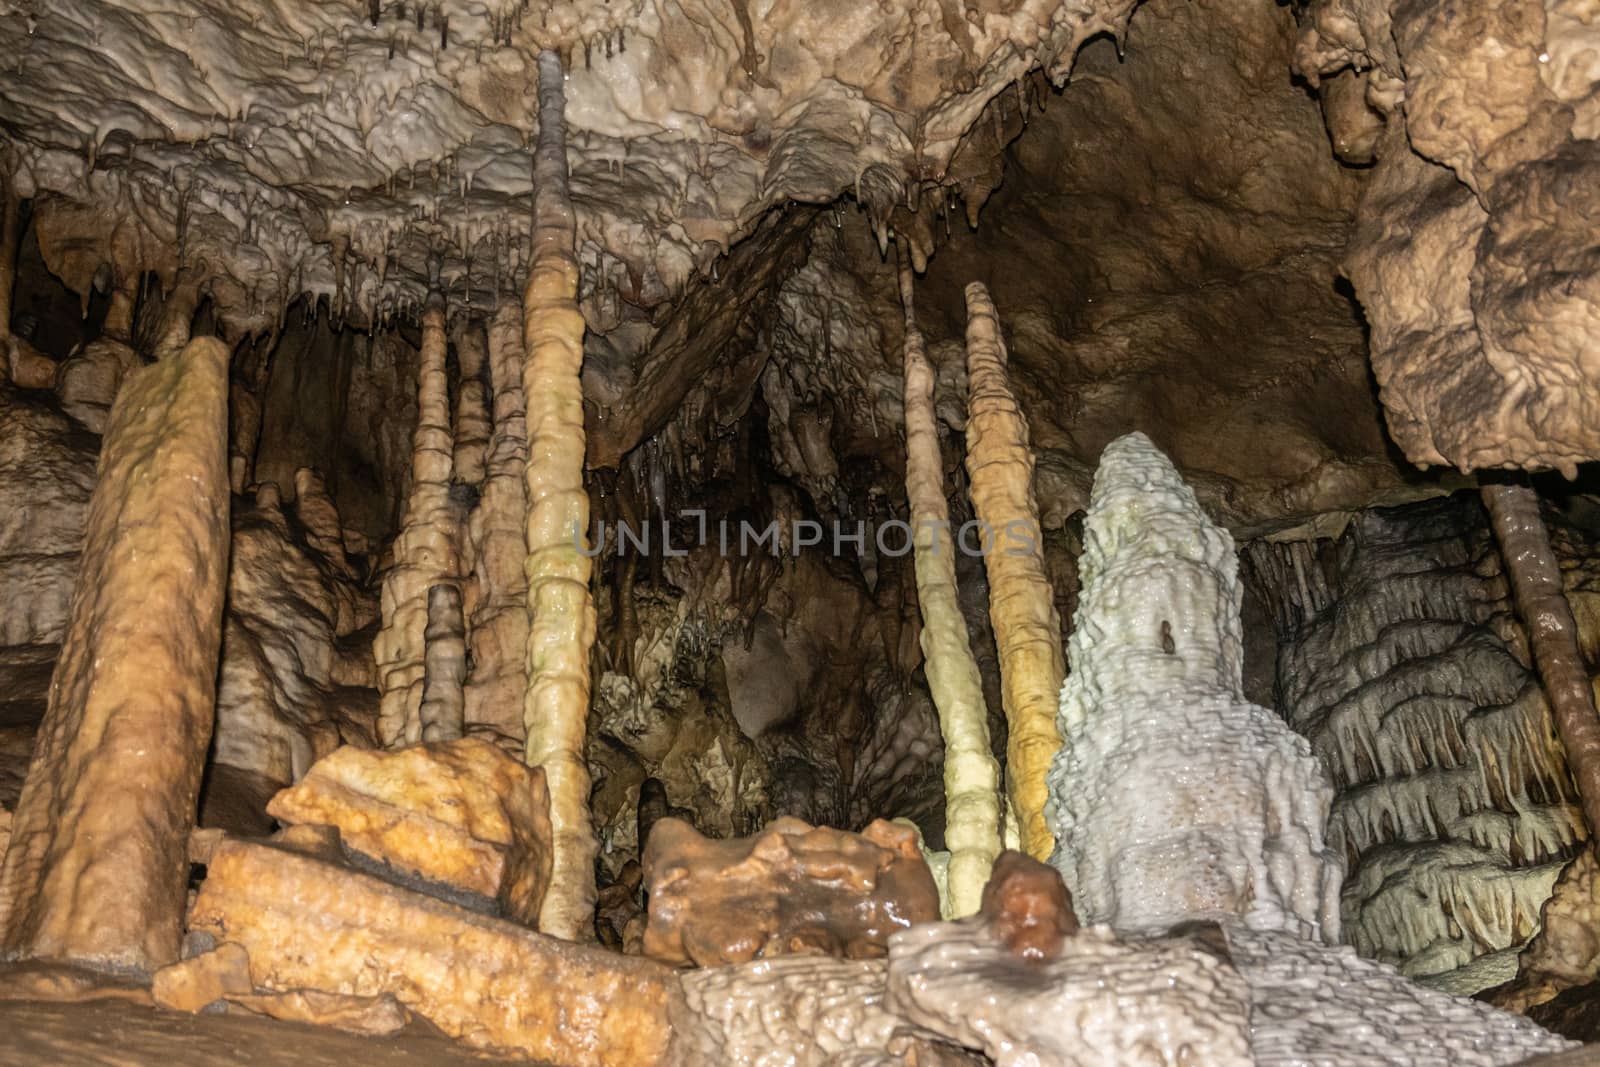 Han-sur-Lesse, Belgium - June 25, 2019: Grottes-de-Han 8 of 36. subterranean pictures of Stalagmites and stalactites in different shapes and colors throughout tunnels, caverns and large halls..